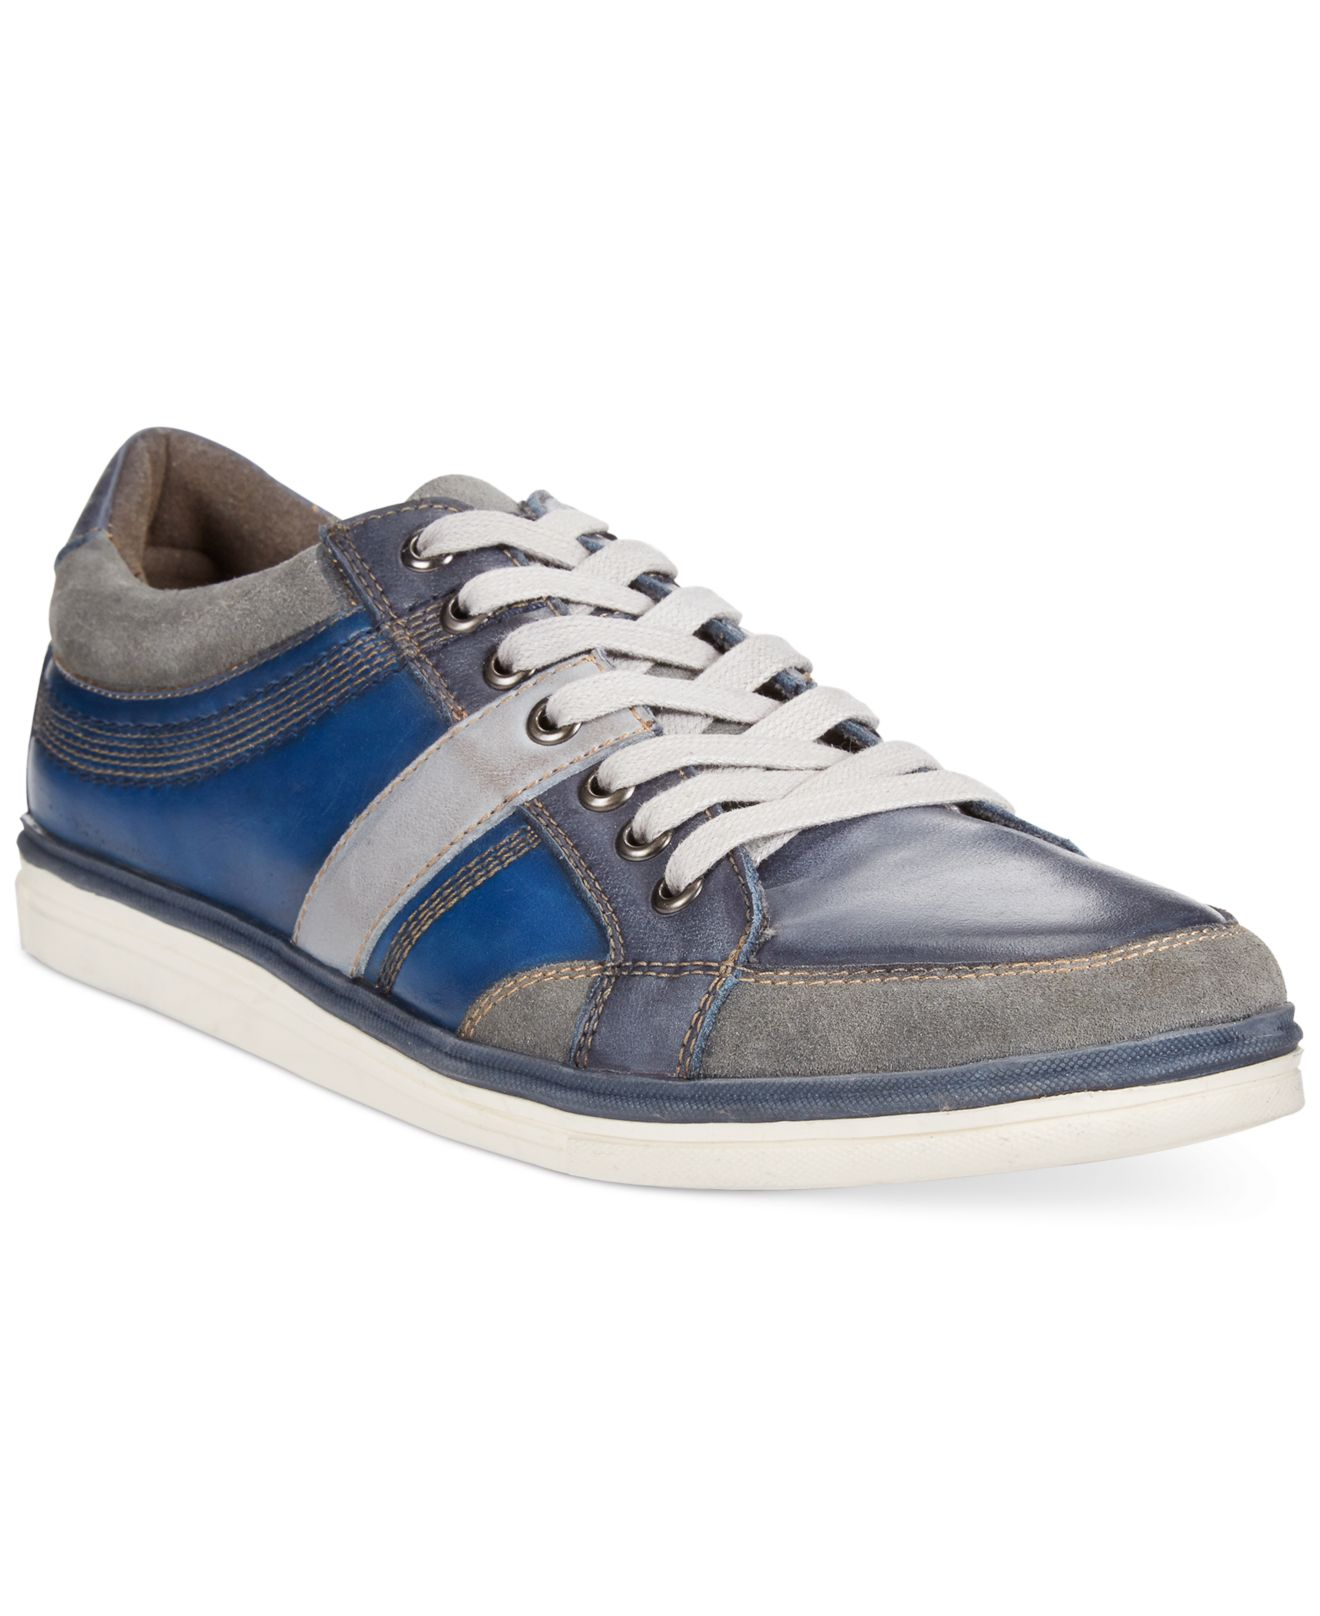 Lyst - Kenneth Cole Reaction Post Up Sneakers in Blue for Men